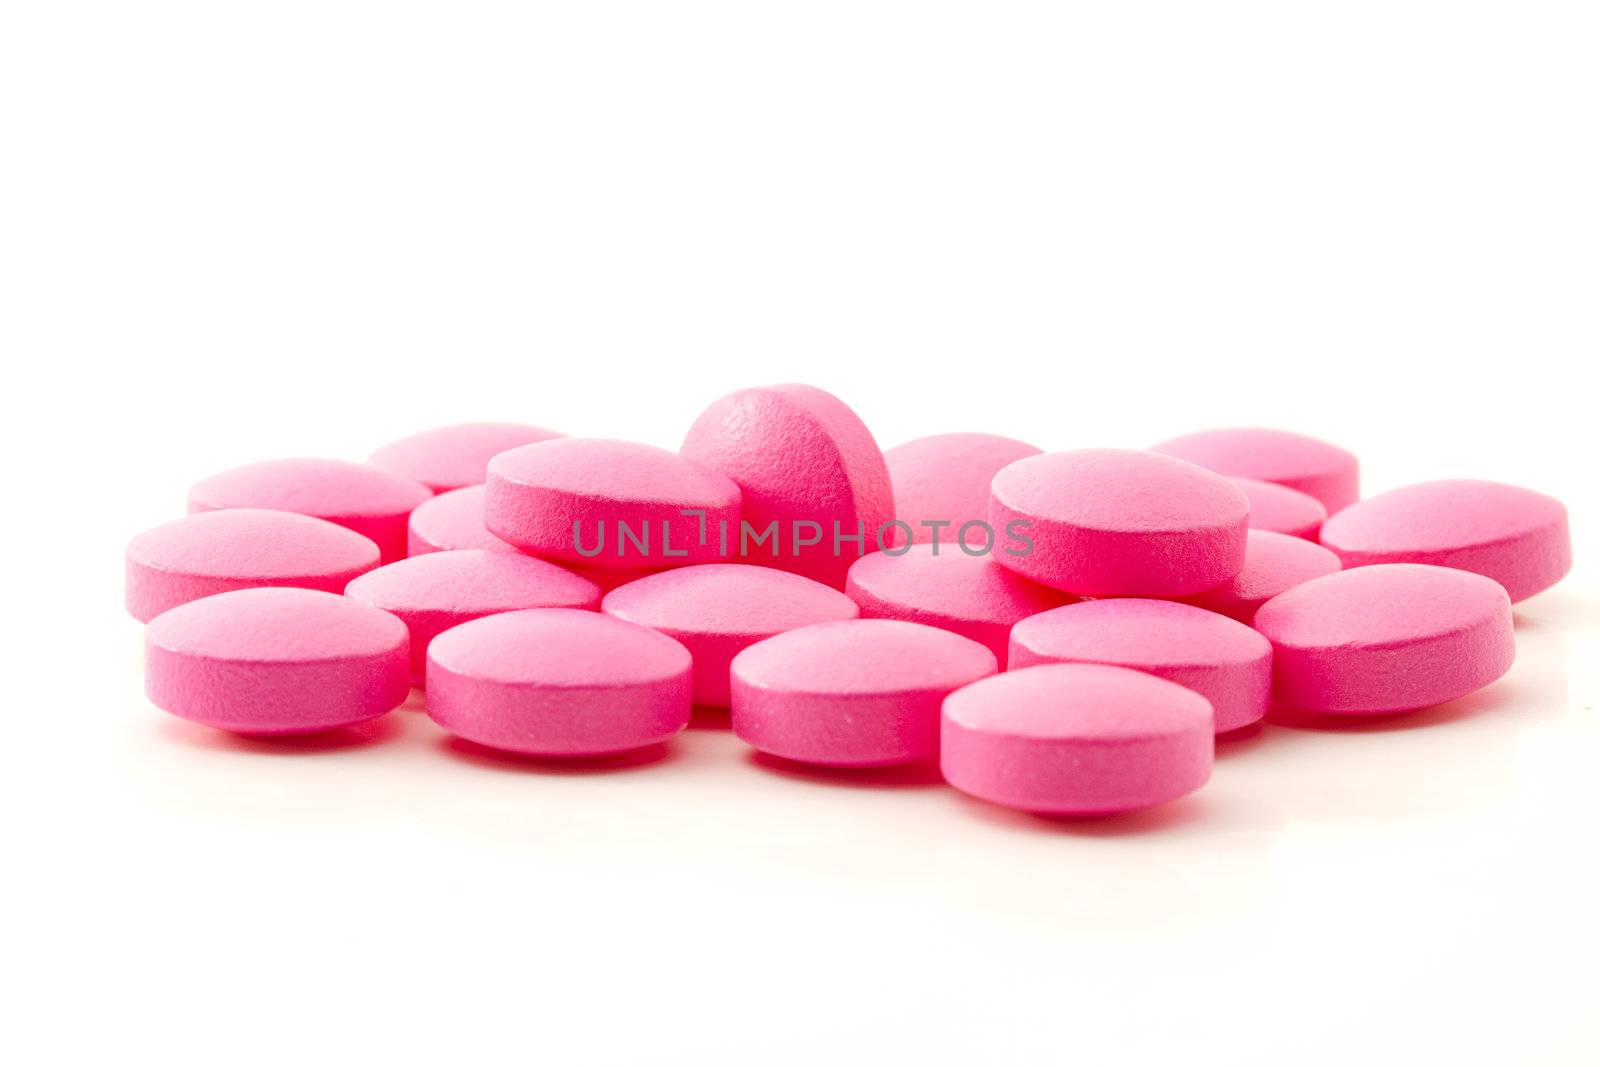 Pink painkillers by RobStark